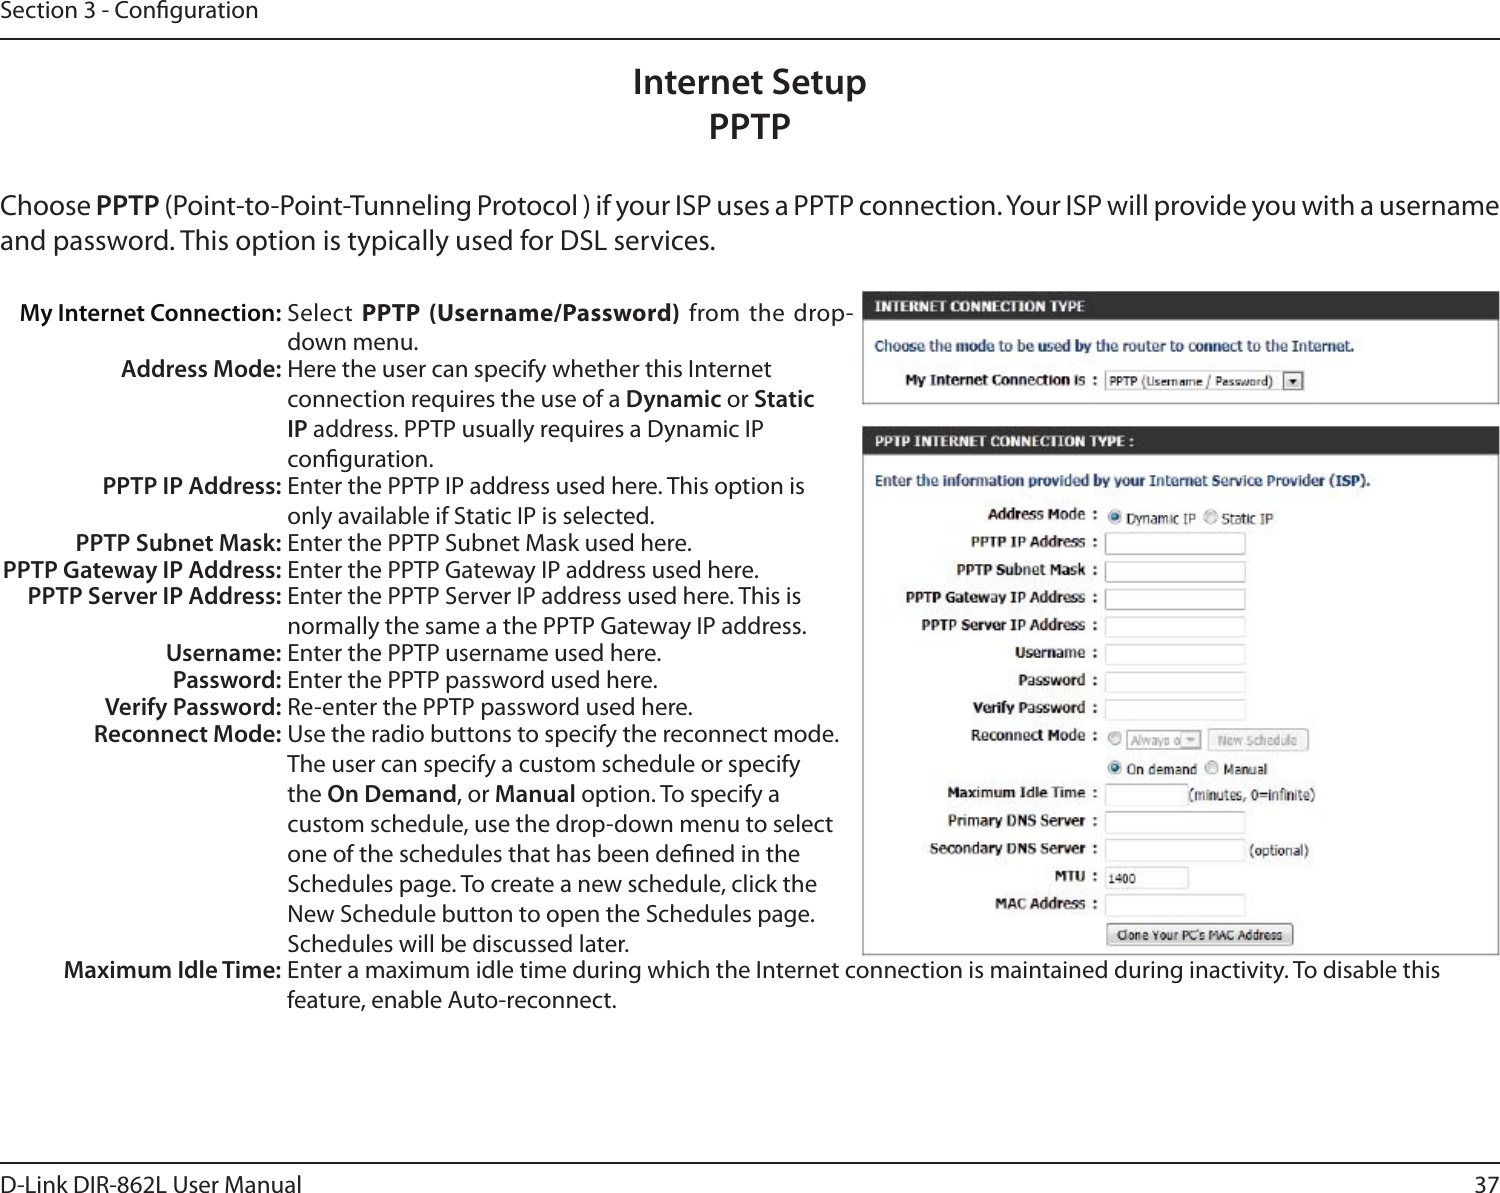 37D-Link DIR-862L User ManualSection 3 - CongurationInternet SetupPPTPChoose PPTP (Point-to-Point-Tunneling Protocol ) if your ISP uses a PPTP connection. Your ISP will provide you with a username and password. This option is typically used for DSL services. My Internet Connection: Select  PPTP (Username/Password) from the drop-down menu.Address Mode: Here the user can specify whether this Internet connection requires the use of a Dynamic or Static IP address. PPTP usually requires a Dynamic IP conguration.PPTP IP Address: Enter the PPTP IP address used here. This option is only available if Static IP is selected.PPTP Subnet Mask: Enter the PPTP Subnet Mask used here.PPTP Gateway IP Address: Enter the PPTP Gateway IP address used here.PPTP Server IP Address: Enter the PPTP Server IP address used here. This is normally the same a the PPTP Gateway IP address.Username: Enter the PPTP username used here.Password: Enter the PPTP password used here.Verify Password: Re-enter the PPTP password used here.Reconnect Mode: Use the radio buttons to specify the reconnect mode. The user can specify a custom schedule or specify the On Demand, or Manual option. To specify a custom schedule, use the drop-down menu to select one of the schedules that has been dened in the Schedules page. To create a new schedule, click the New Schedule button to open the Schedules page. Schedules will be discussed later.Maximum Idle Time: Enter a maximum idle time during which the Internet connection is maintained during inactivity. To disable this feature, enable Auto-reconnect.